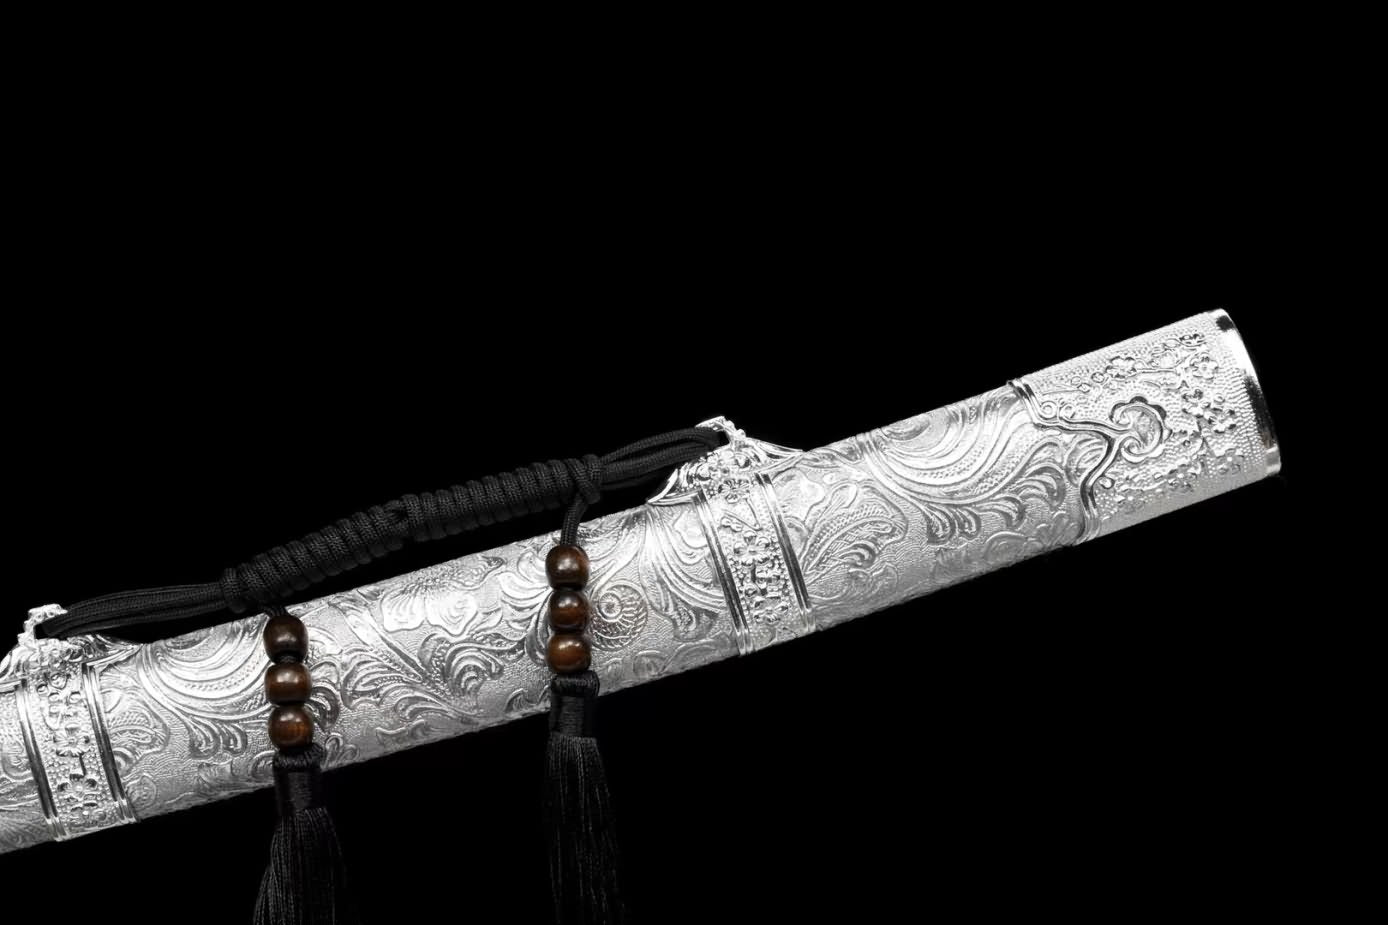 chinese sword,Brotherhood of Blades high Carbon Steel,Alloy Fittings,Wood PU Scabbard,LOONGSWORD